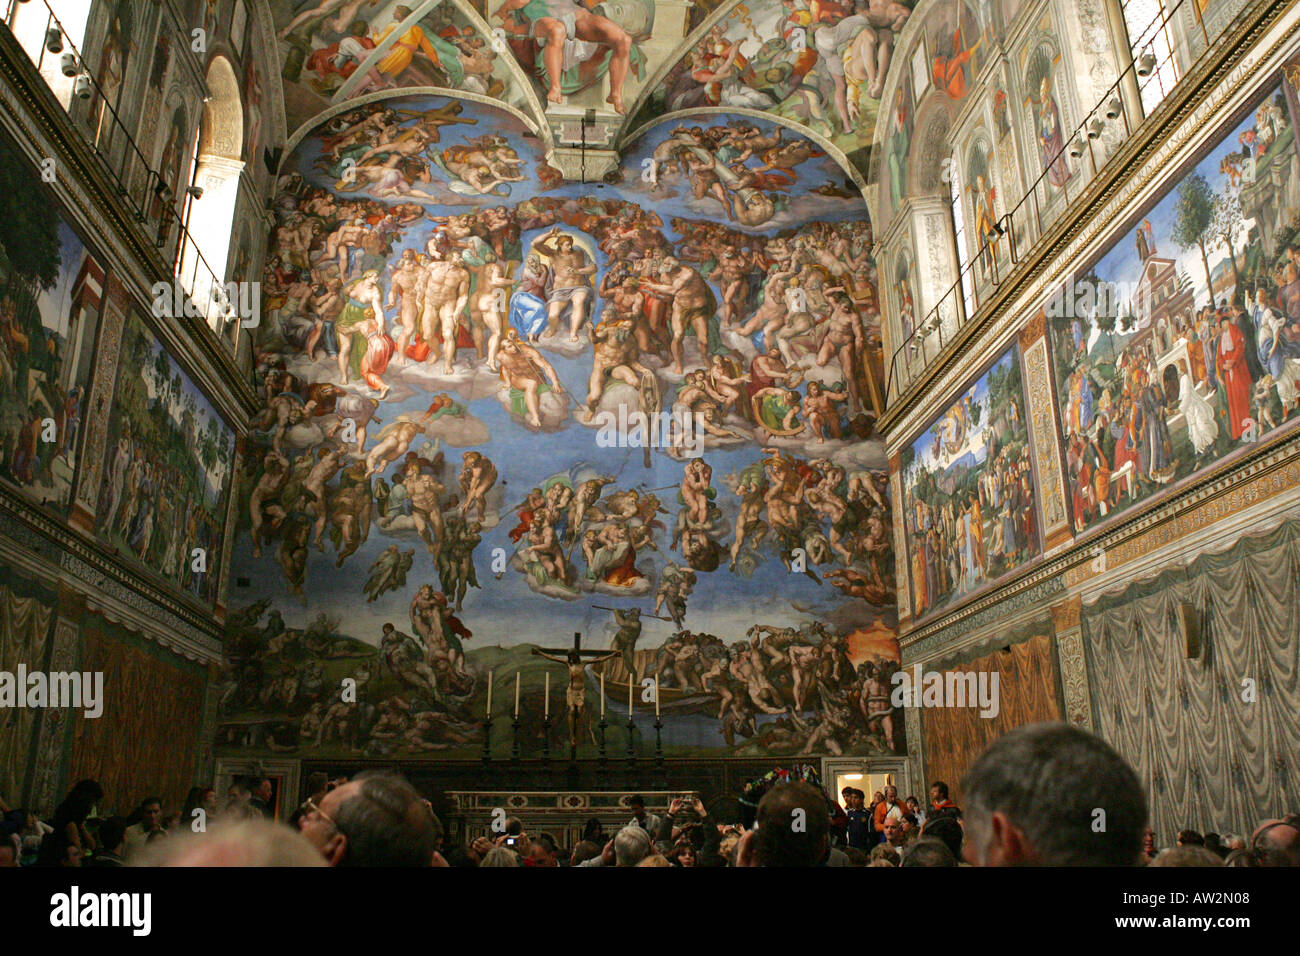 The Last Judgement fresco painting in the famous tourist attraction Sistine Chapel Vatican City Rome Italy Europe Michelangelo Stock Photo